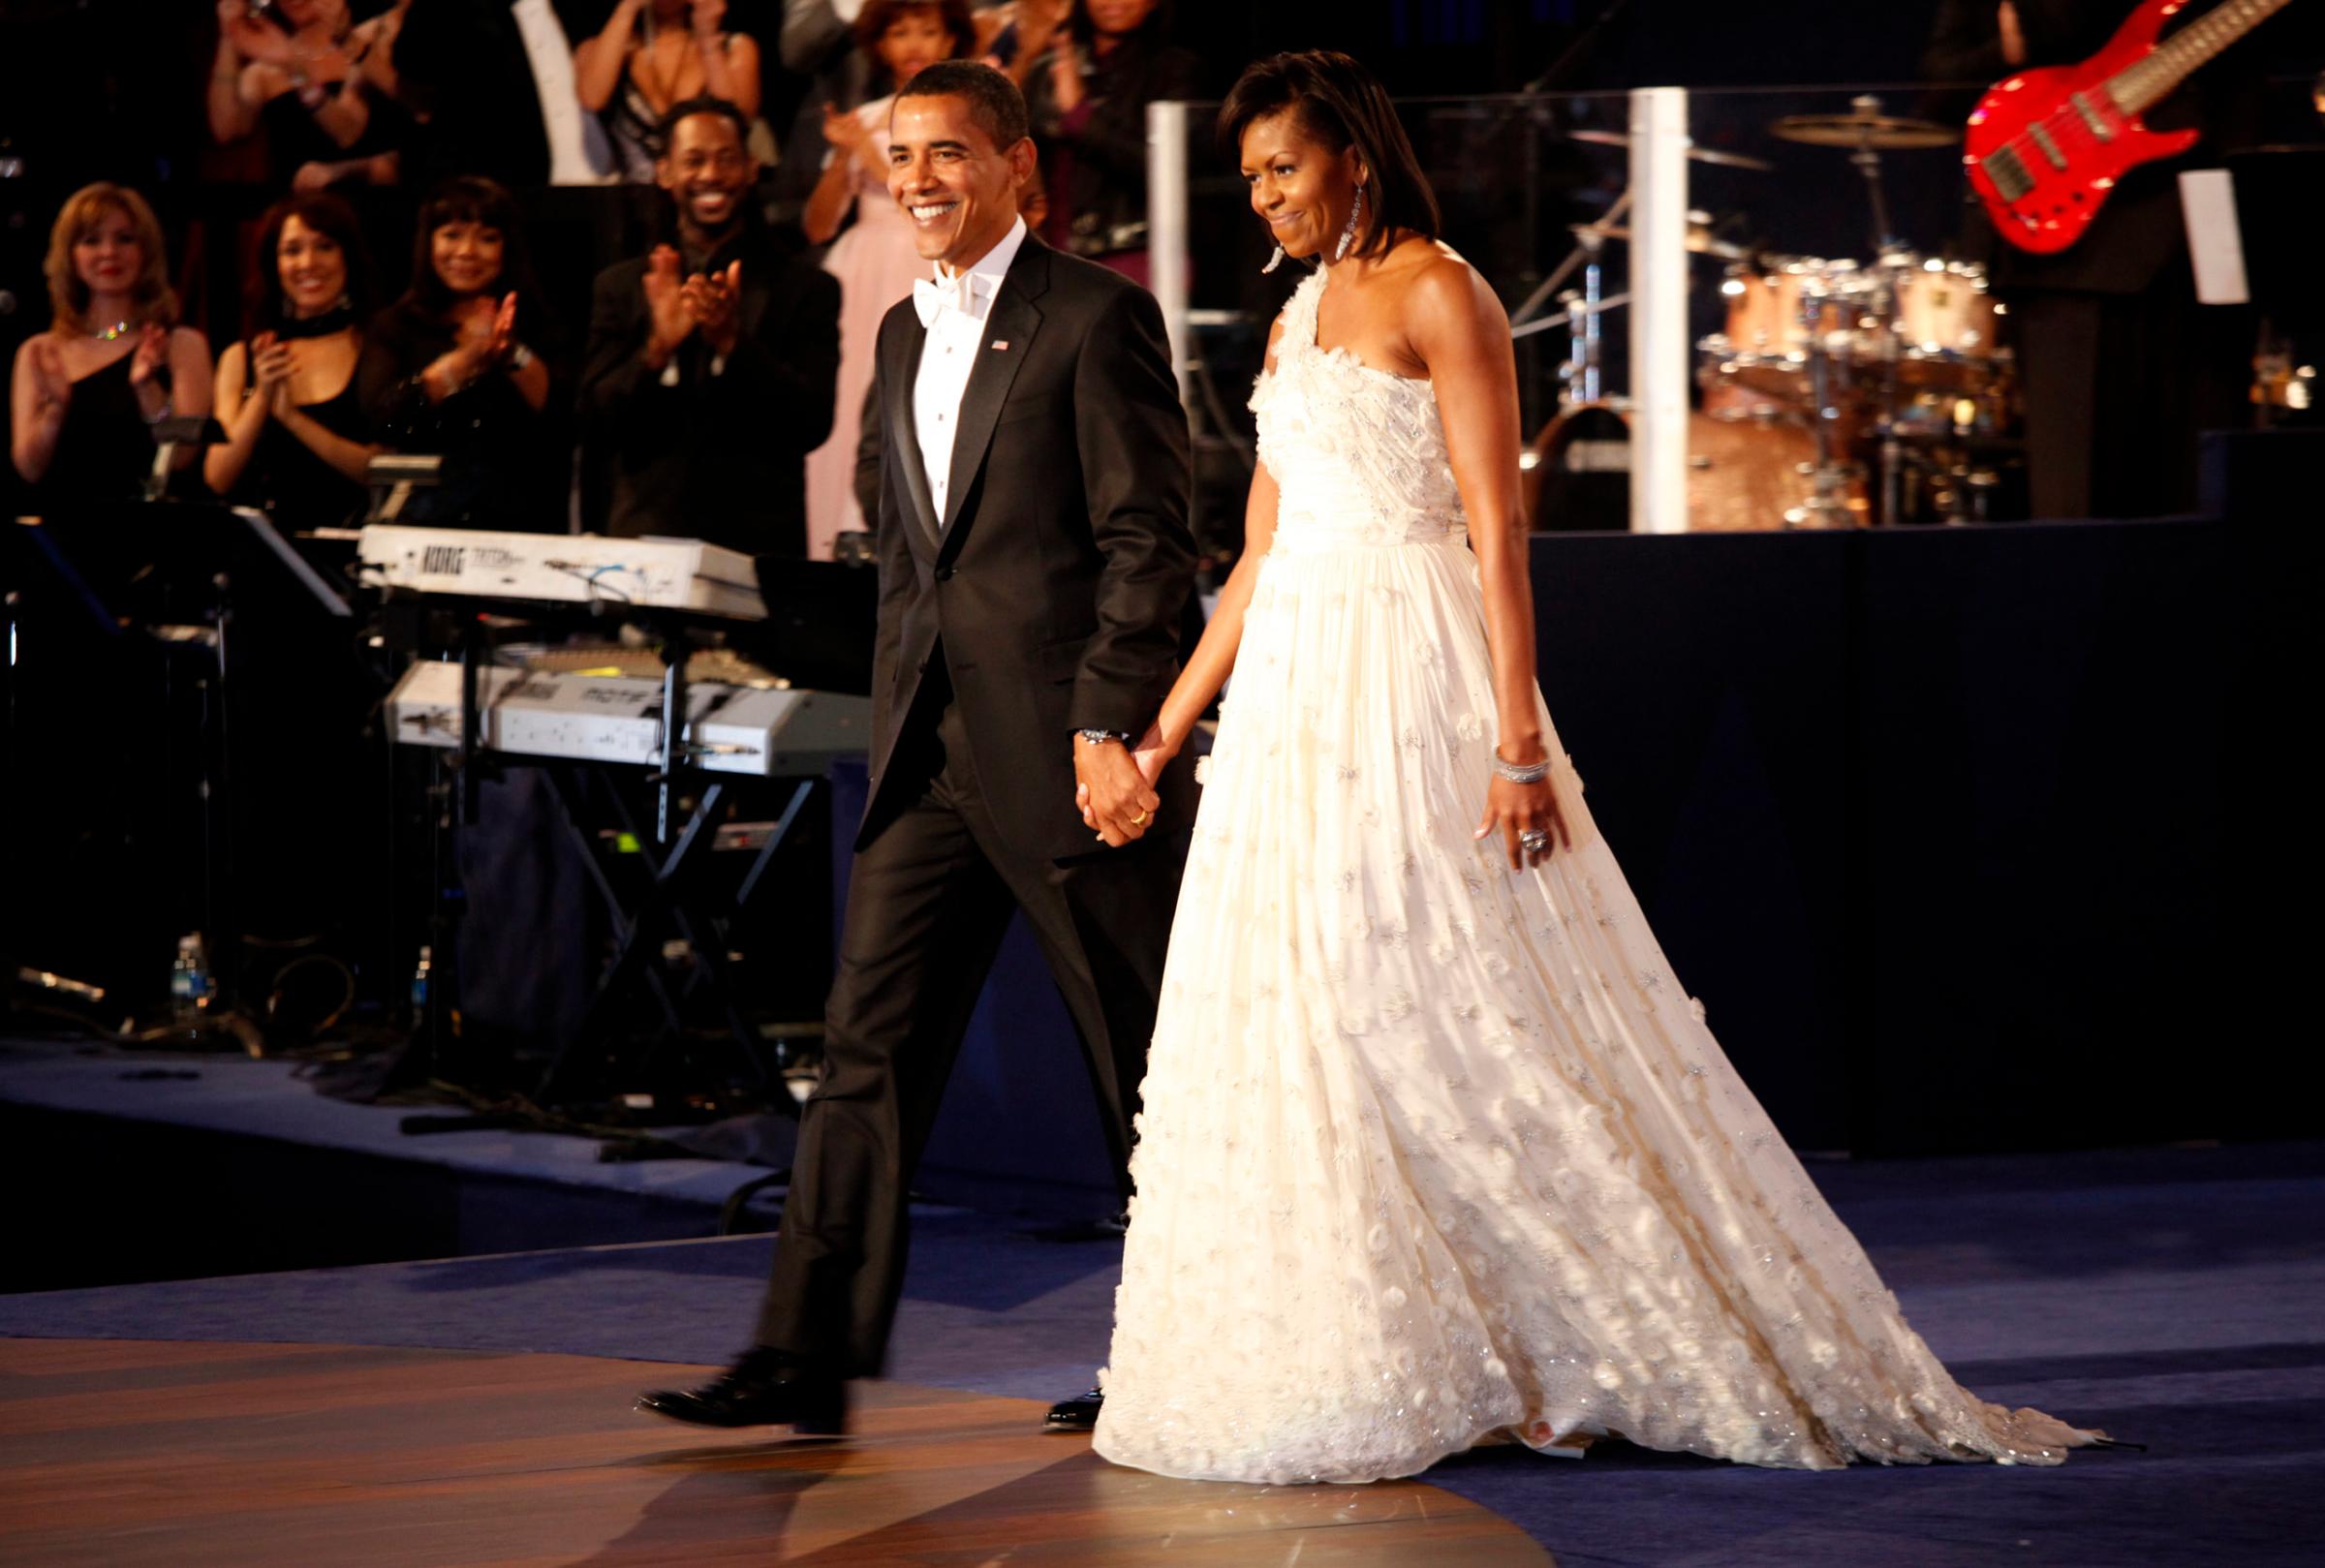 President Barack Obama and first lady Michelle arriving on stage for a dance, at the Neighborhood Inaugural Ball at the Convention Center in Washington, Tuesday, January 20, 2009.